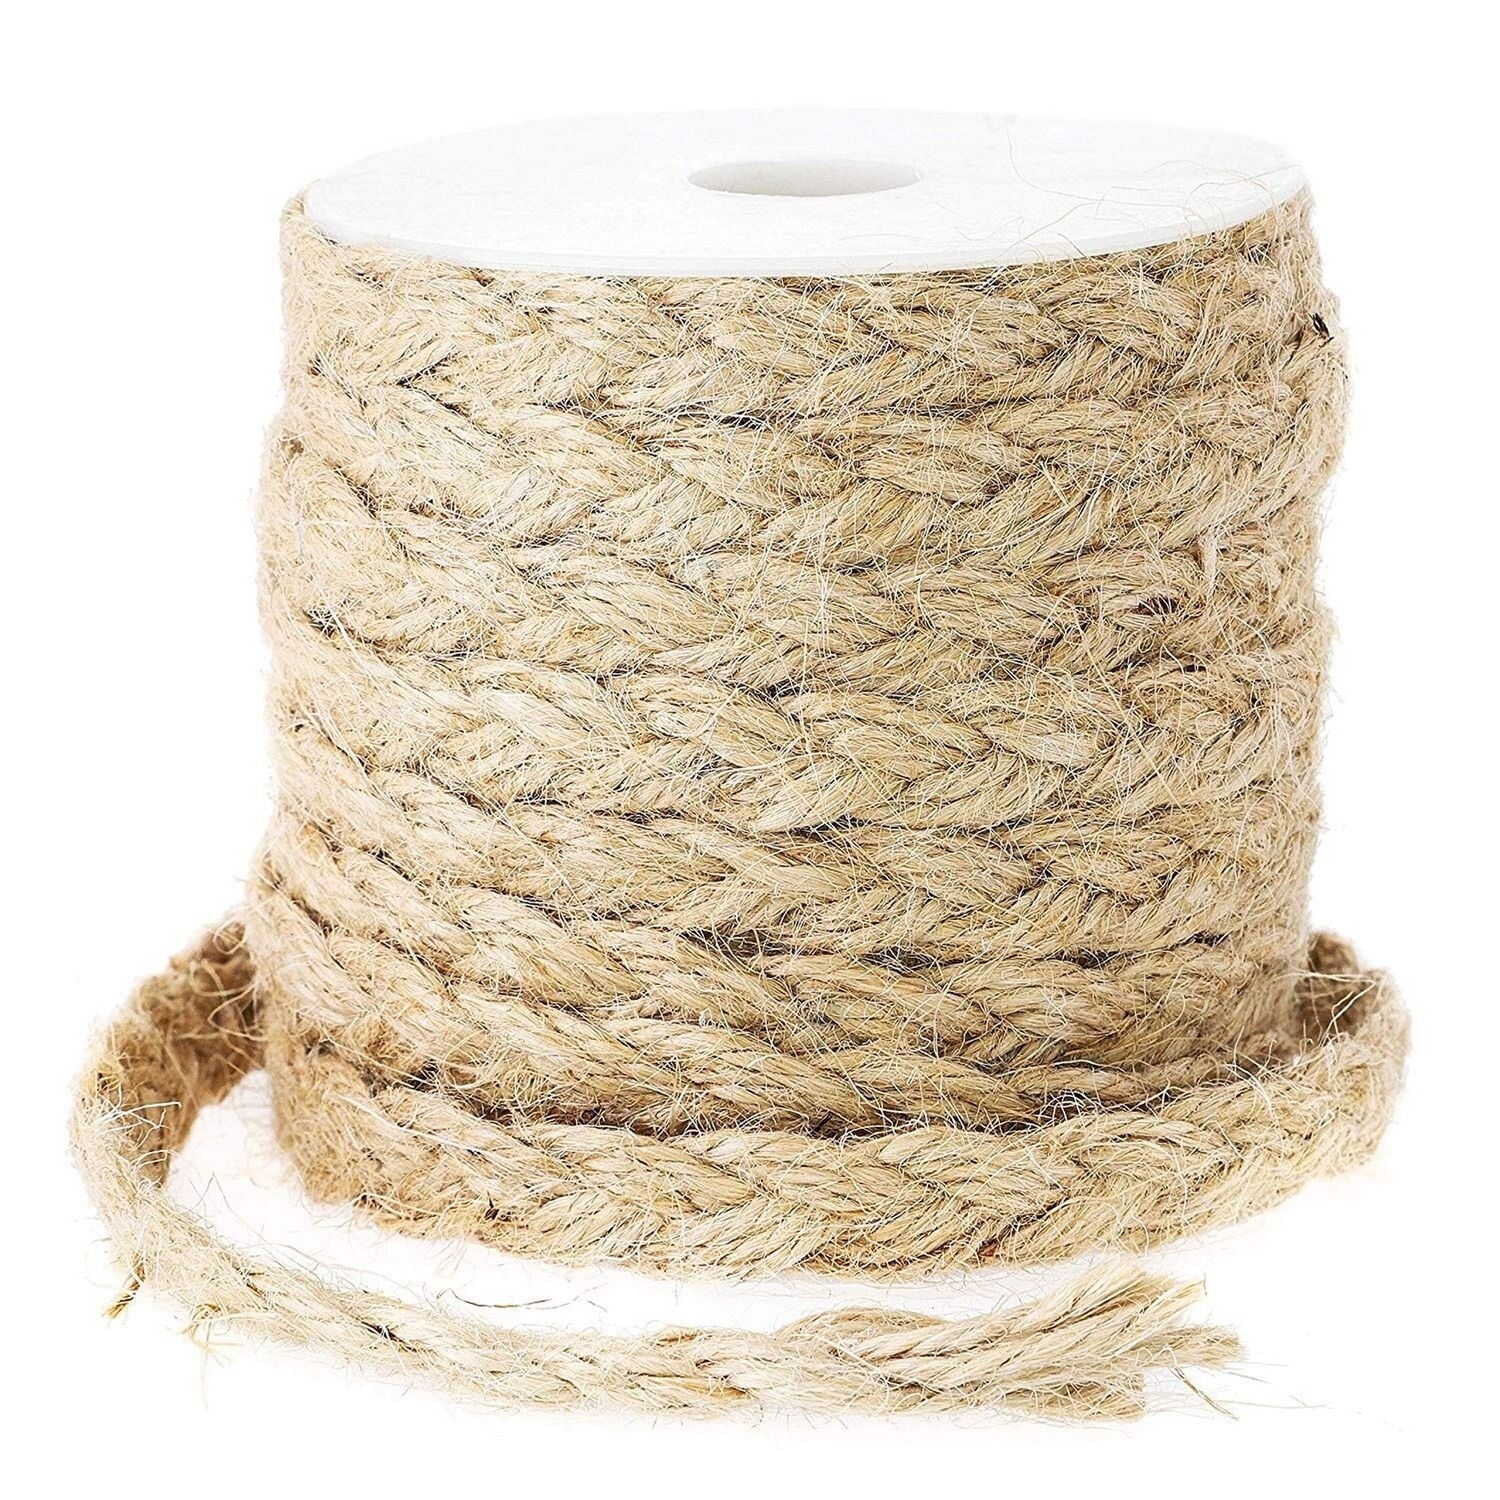 https://ak1.ostkcdn.com/images/products/29606624/2-Pack-26-Feet-Natural-Jute-Rope-Cord-Twine-String-for-Crafts-DIY-0.4-Wide-54b3df70-29d4-4f9d-b391-cfd3f69dfa3c.jpg